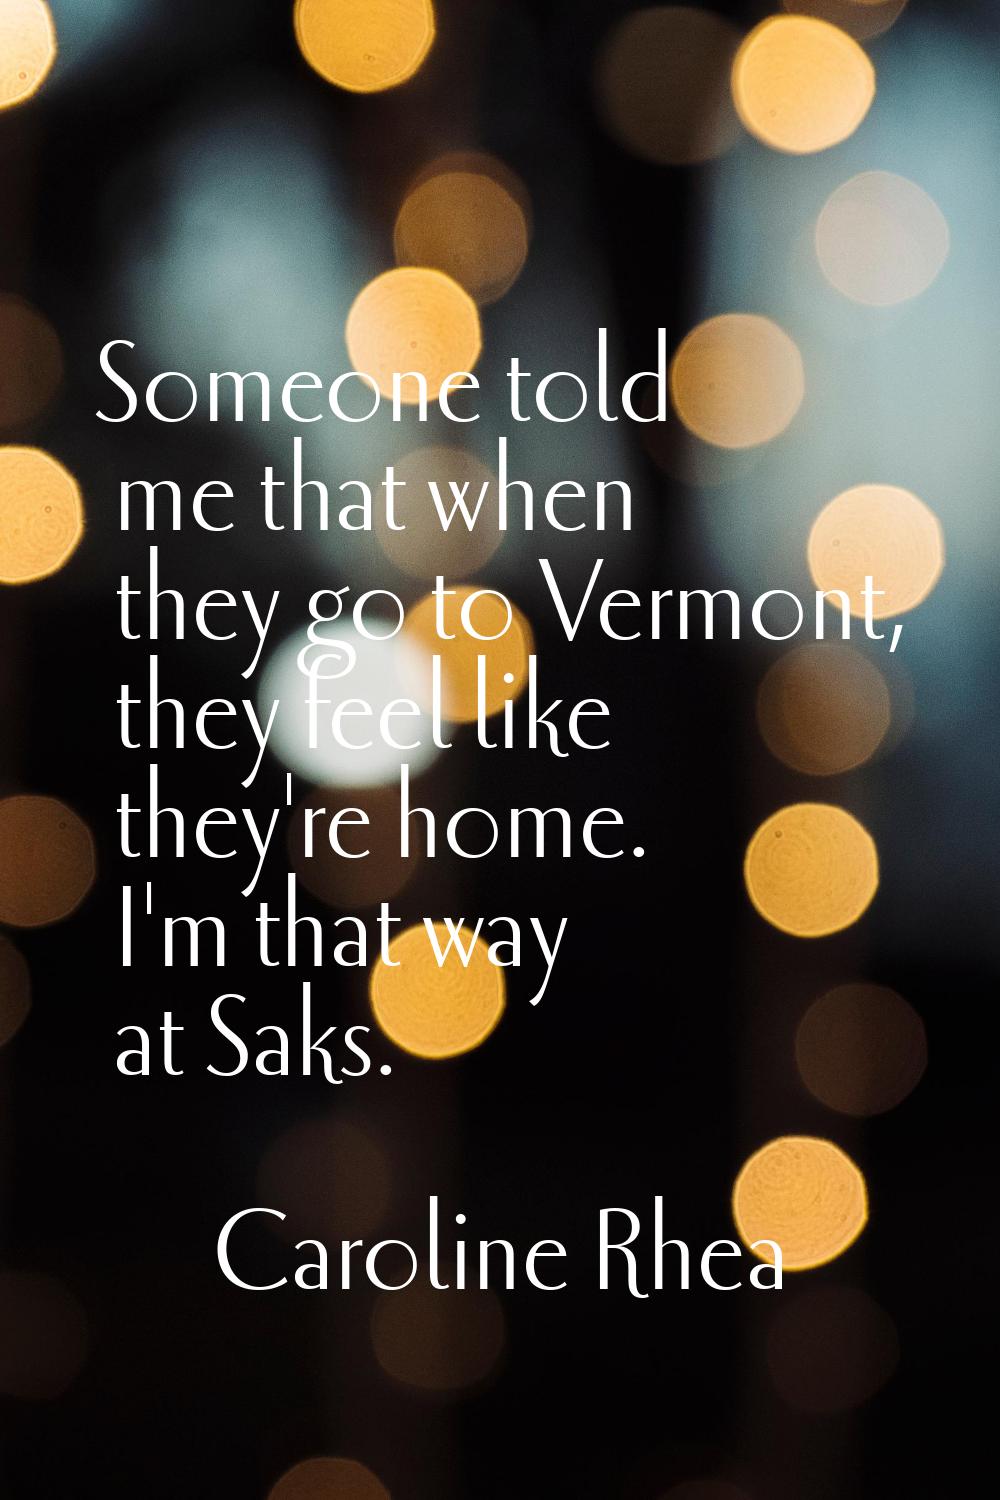 Someone told me that when they go to Vermont, they feel like they're home. I'm that way at Saks.